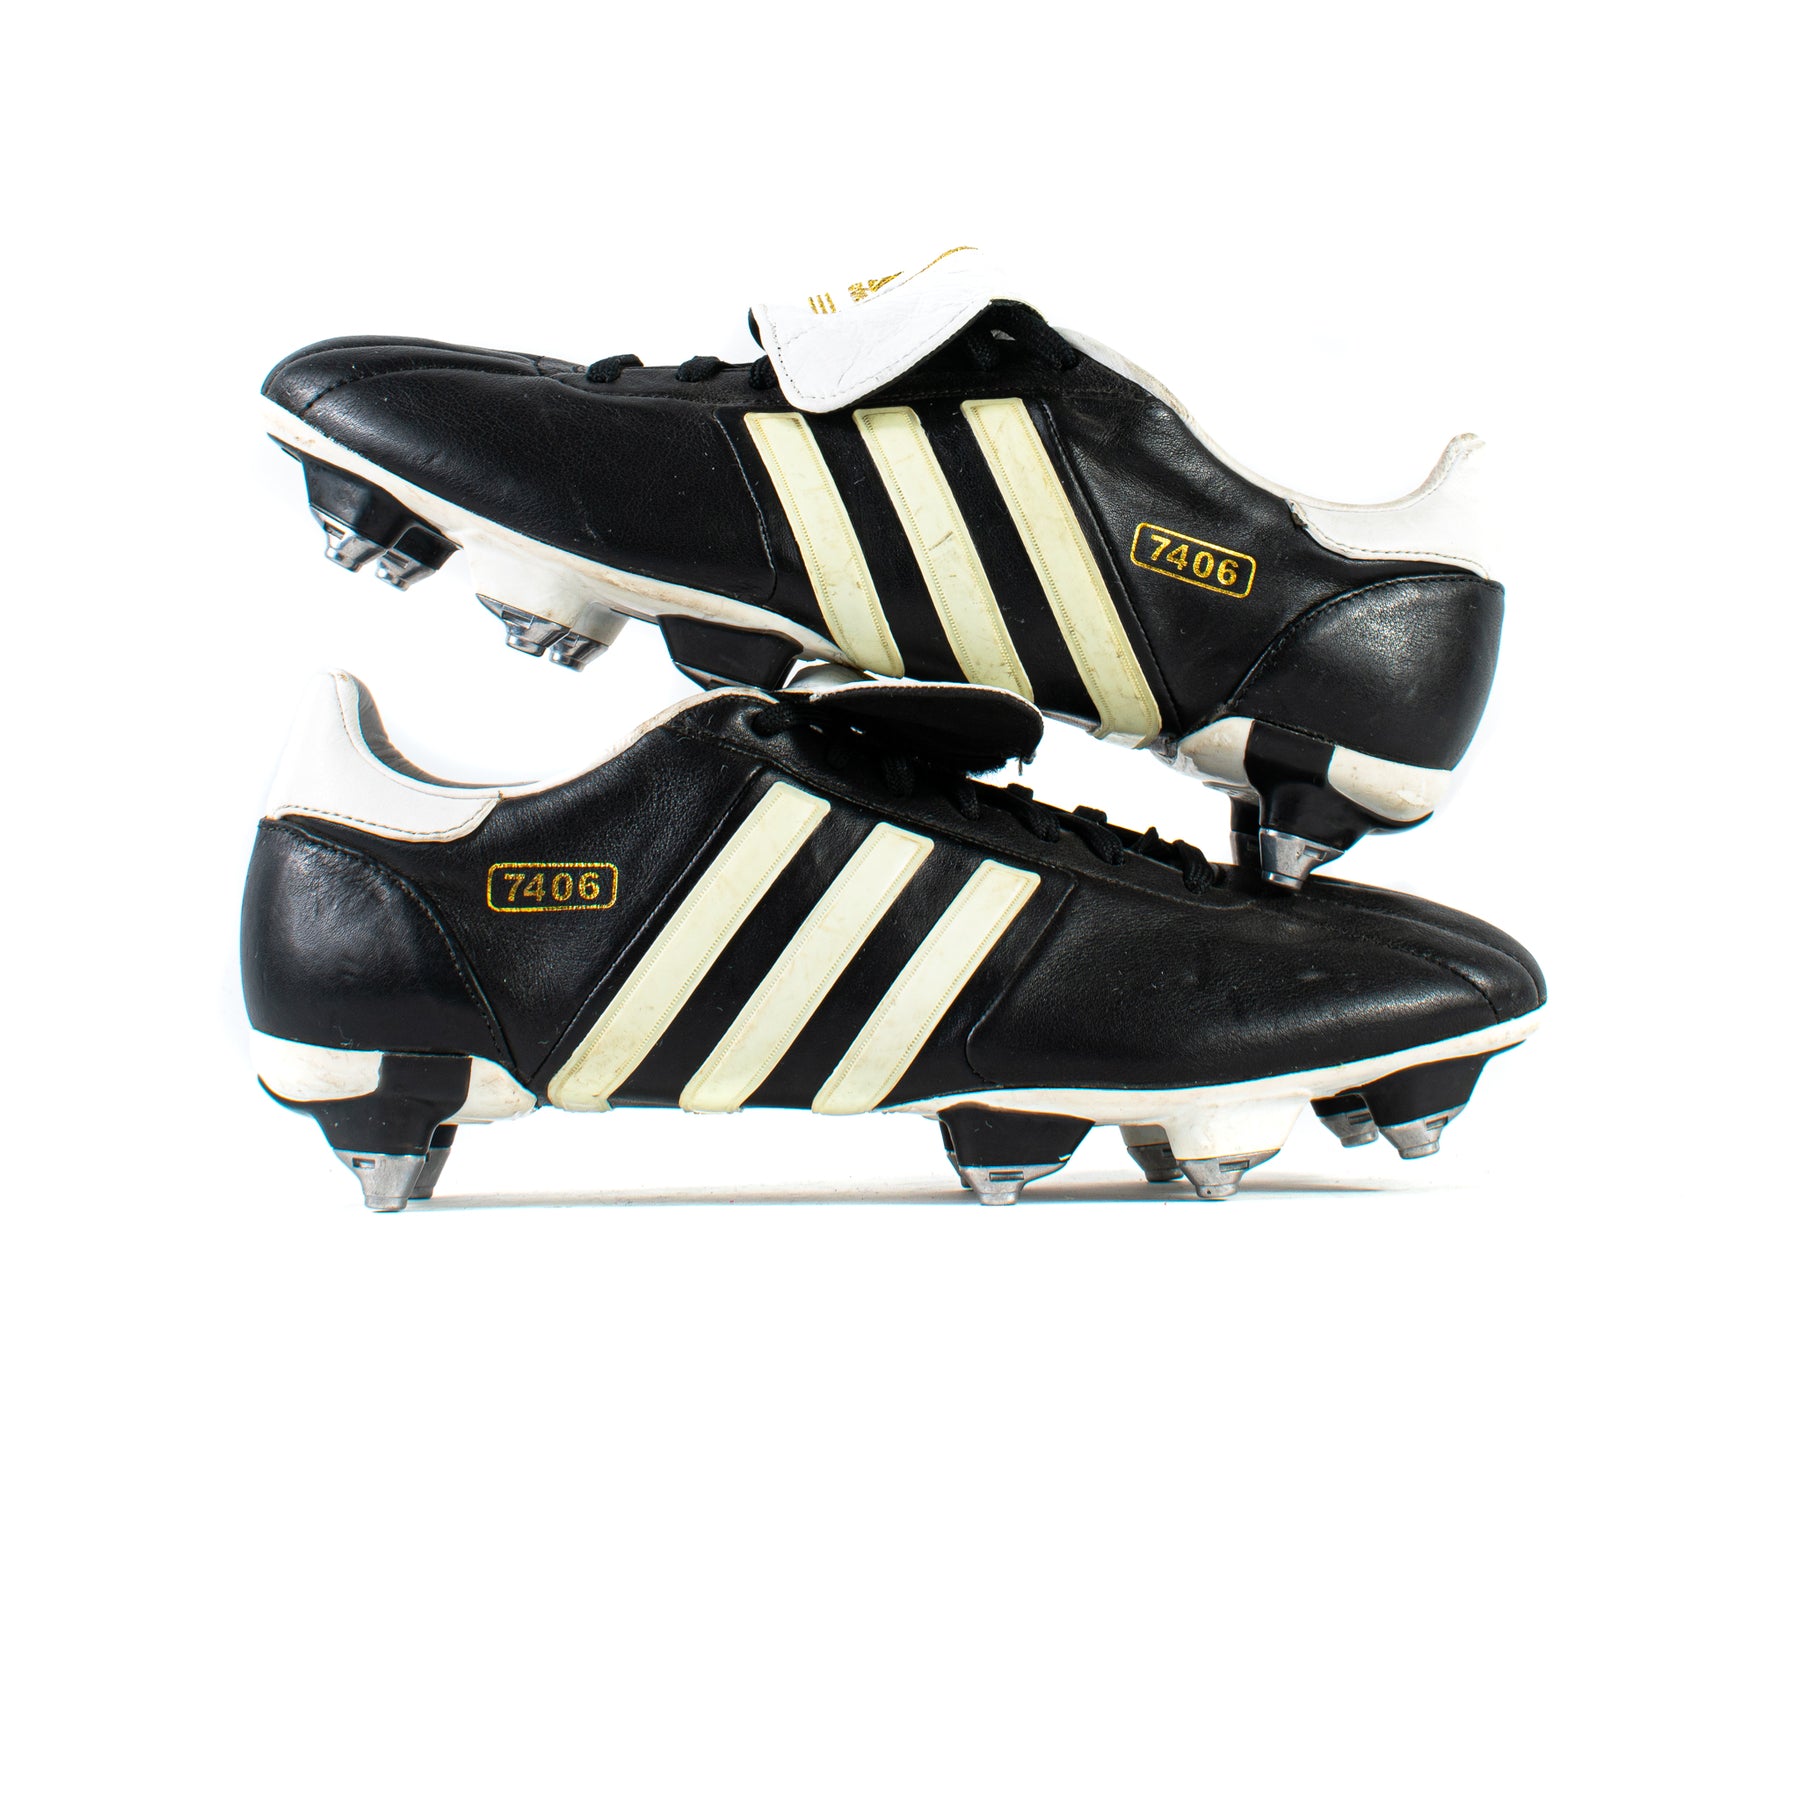 Adidas Black White Classic Soccer Cleats